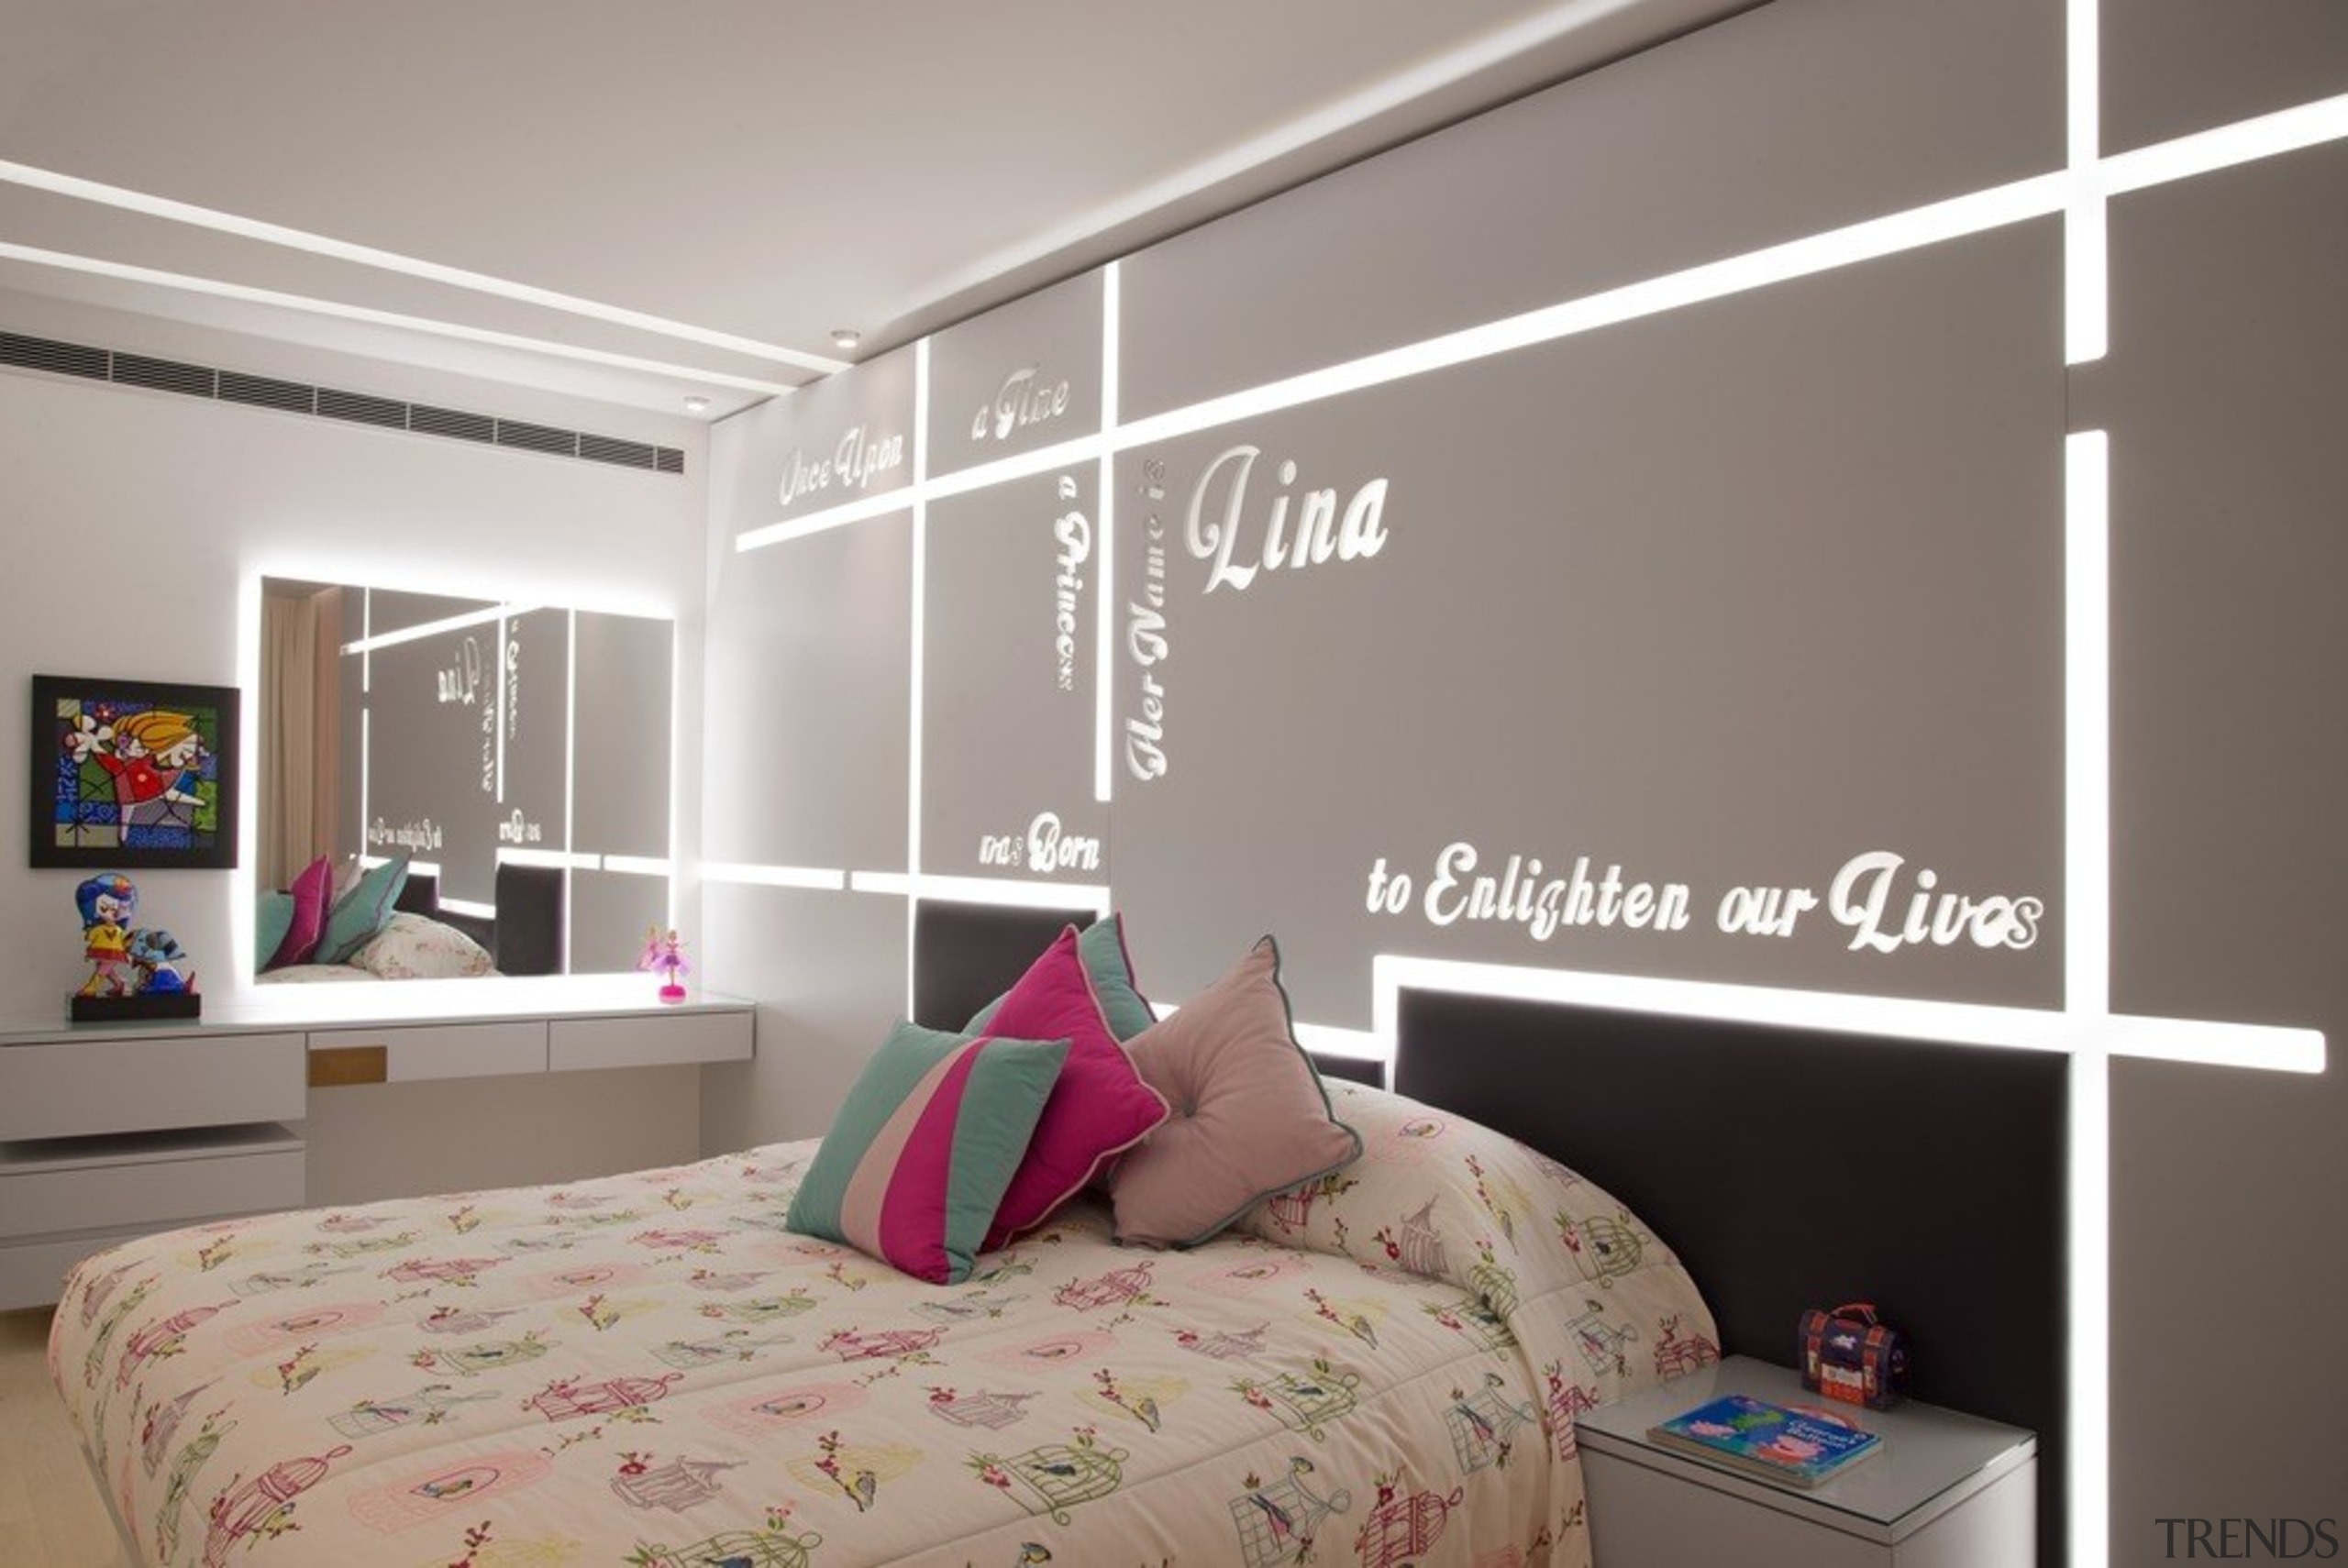 The girl’s room reveals special words telling the bed, bed frame, bed sheet, bedding, bedroom, building, ceiling, design, furniture, interior design, lighting, room, wall, wallpaper, window, gray